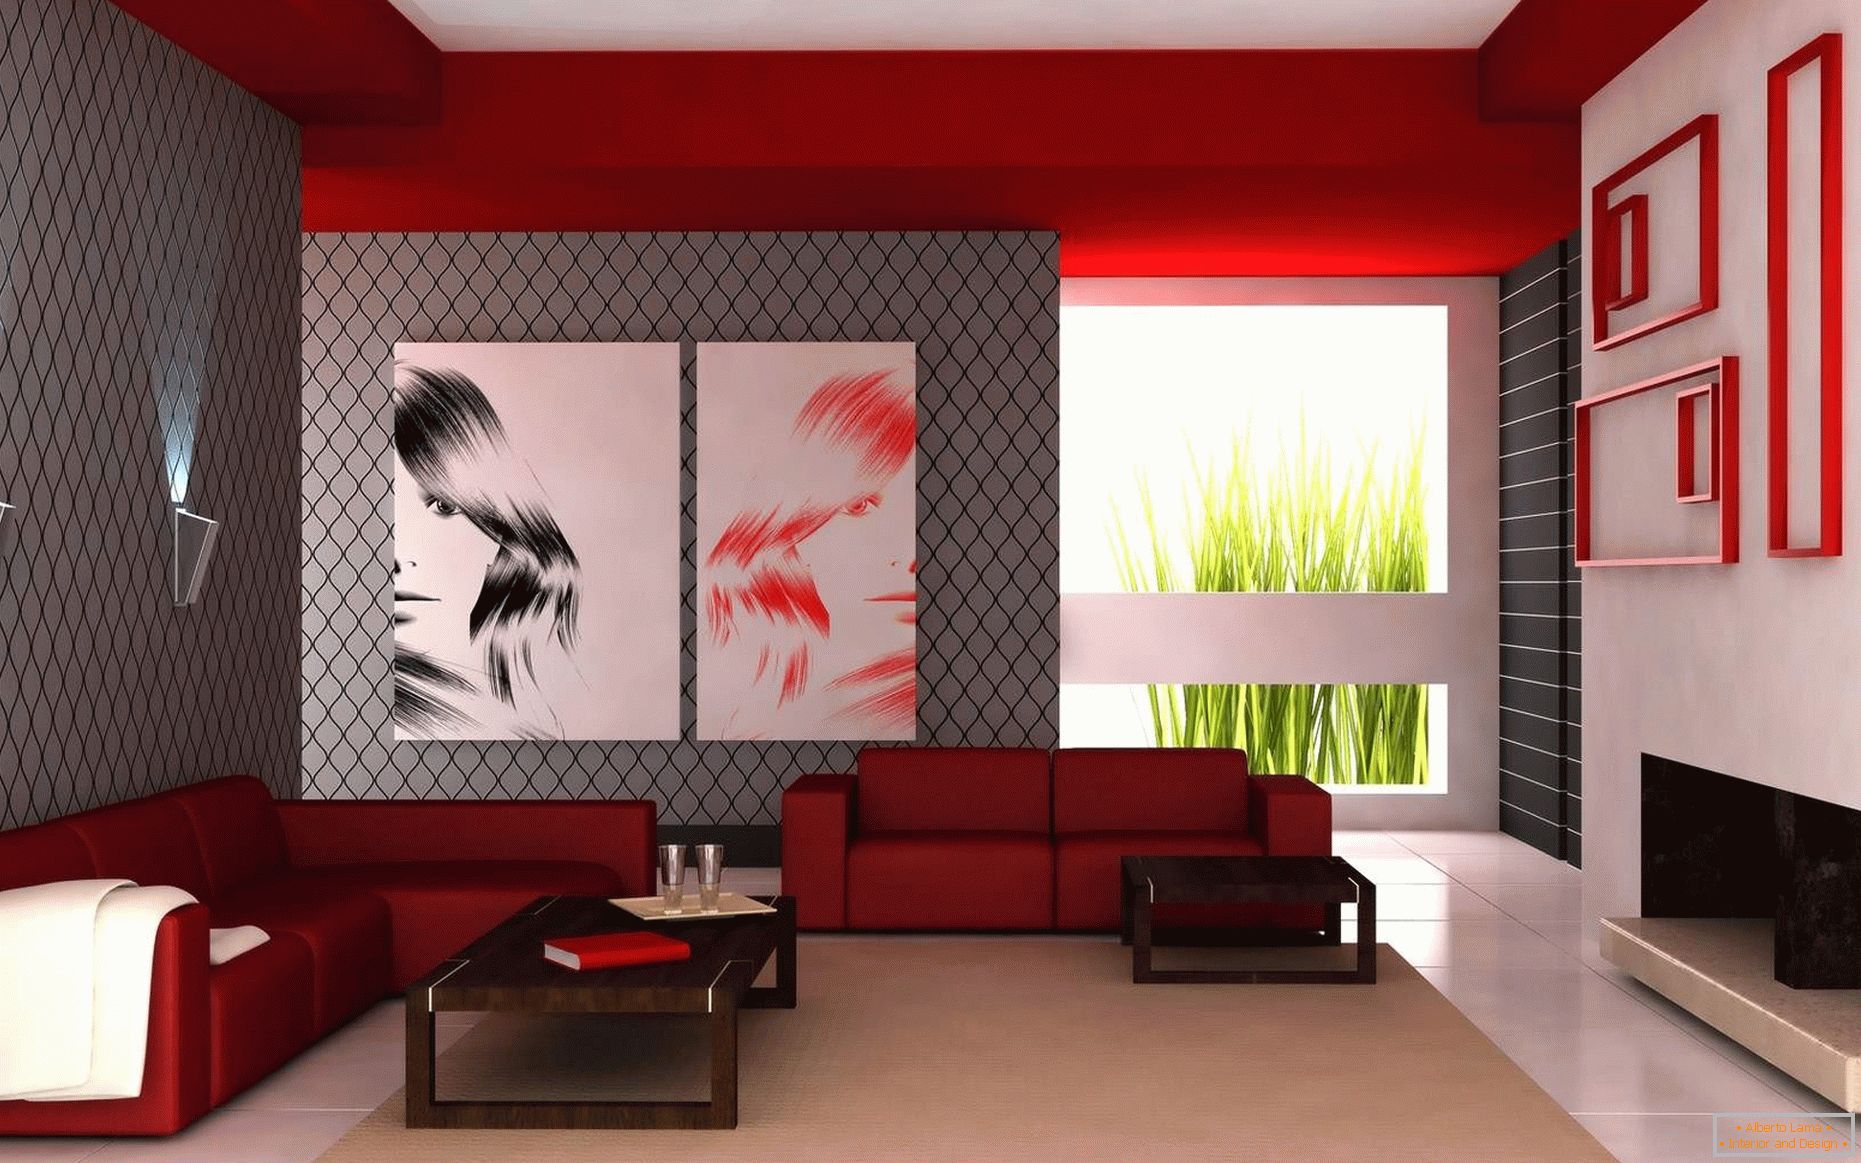 The combination of white, red and gray colors in the living room